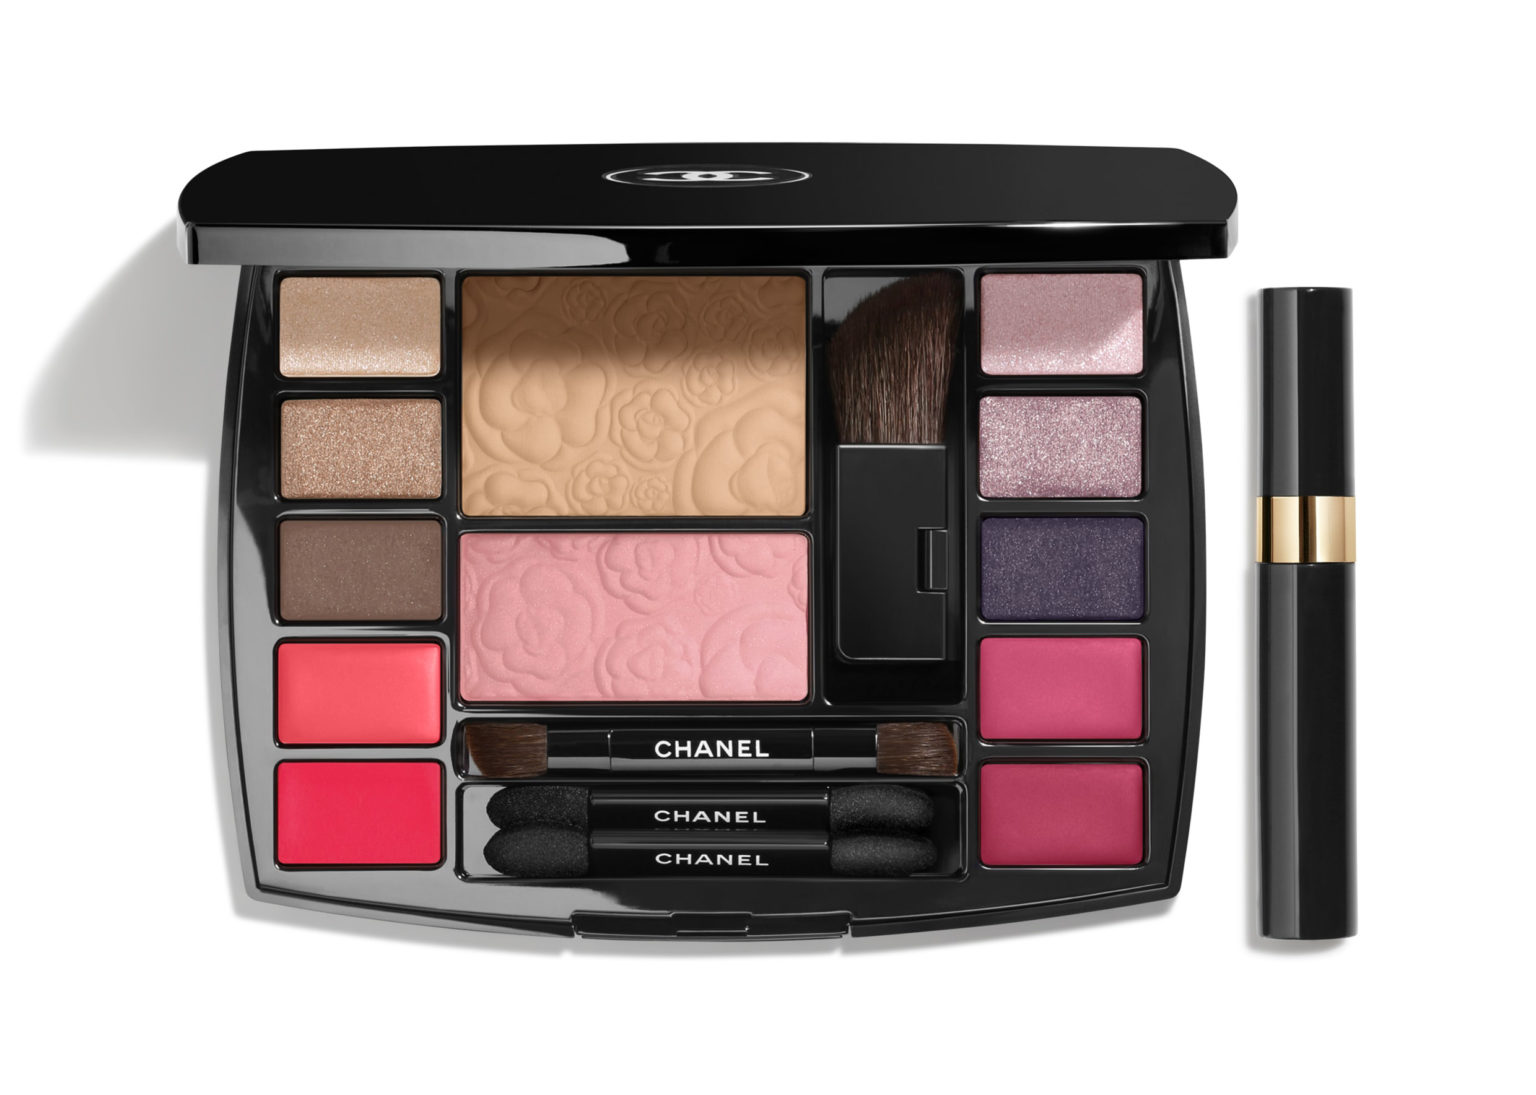 10 Best Travel Makeup Kits, Palettes, and Minis Perfect for Vacay in 2022